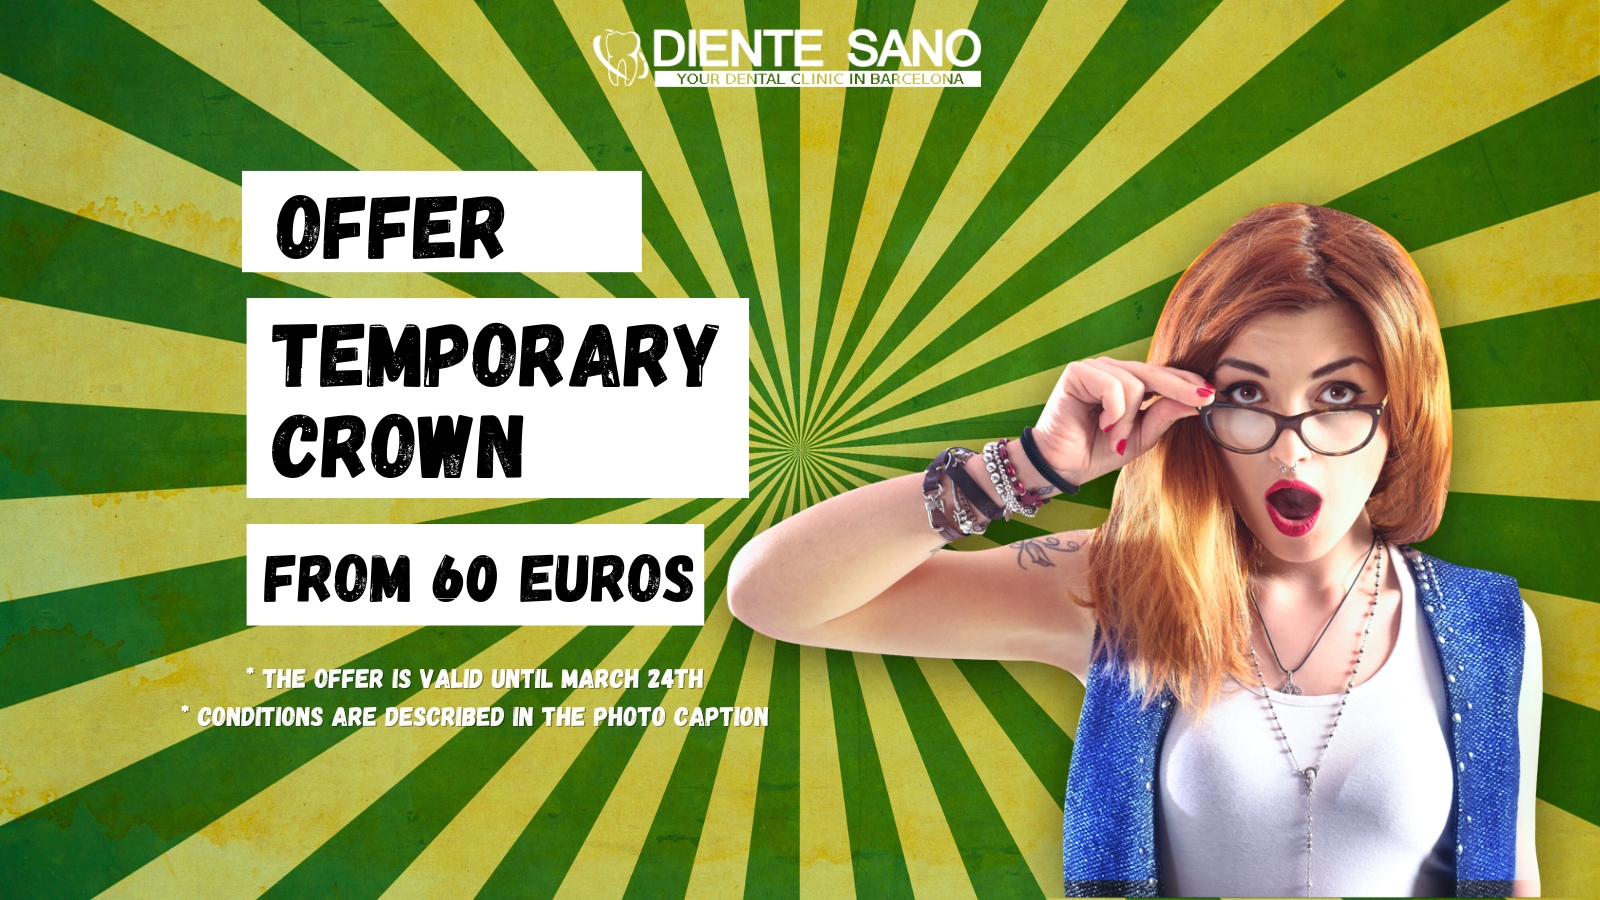 At Diente Sano Dental Clinic in Barcelona, we strive to provide each of our patients with high-quality care and the best solutions for the health and beauty of their smile. Therefore, we are pleased to offer you a special offer for the installation of a temporary crown at a price from 60 euros. This is an excellent opportunity to ensure protection and aesthetics for your tooth while waiting for the permanent crown.